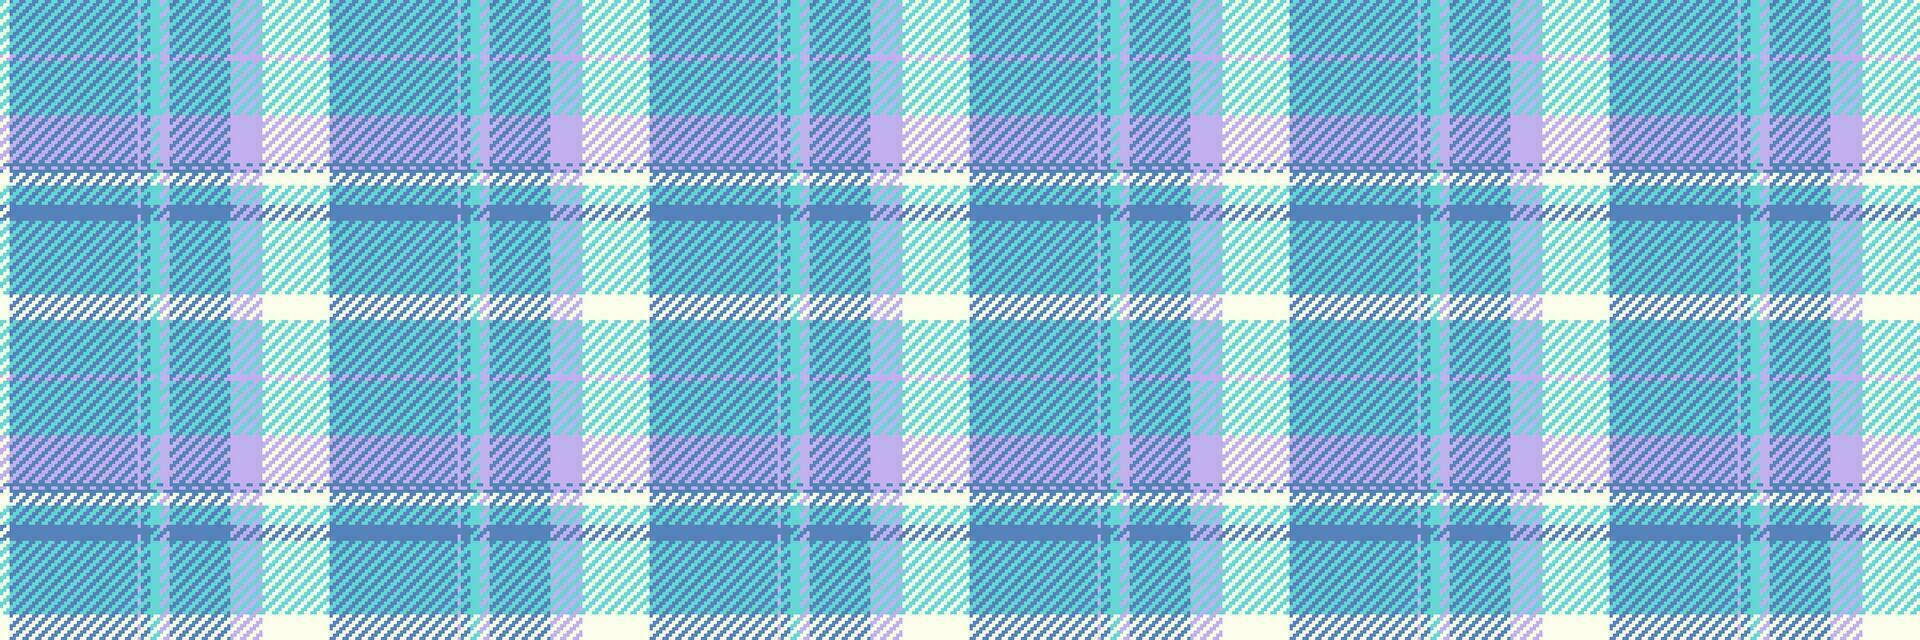 Korean plaid background check, lined pattern fabric tartan. Trend textile seamless texture vector in teal and blue colors.